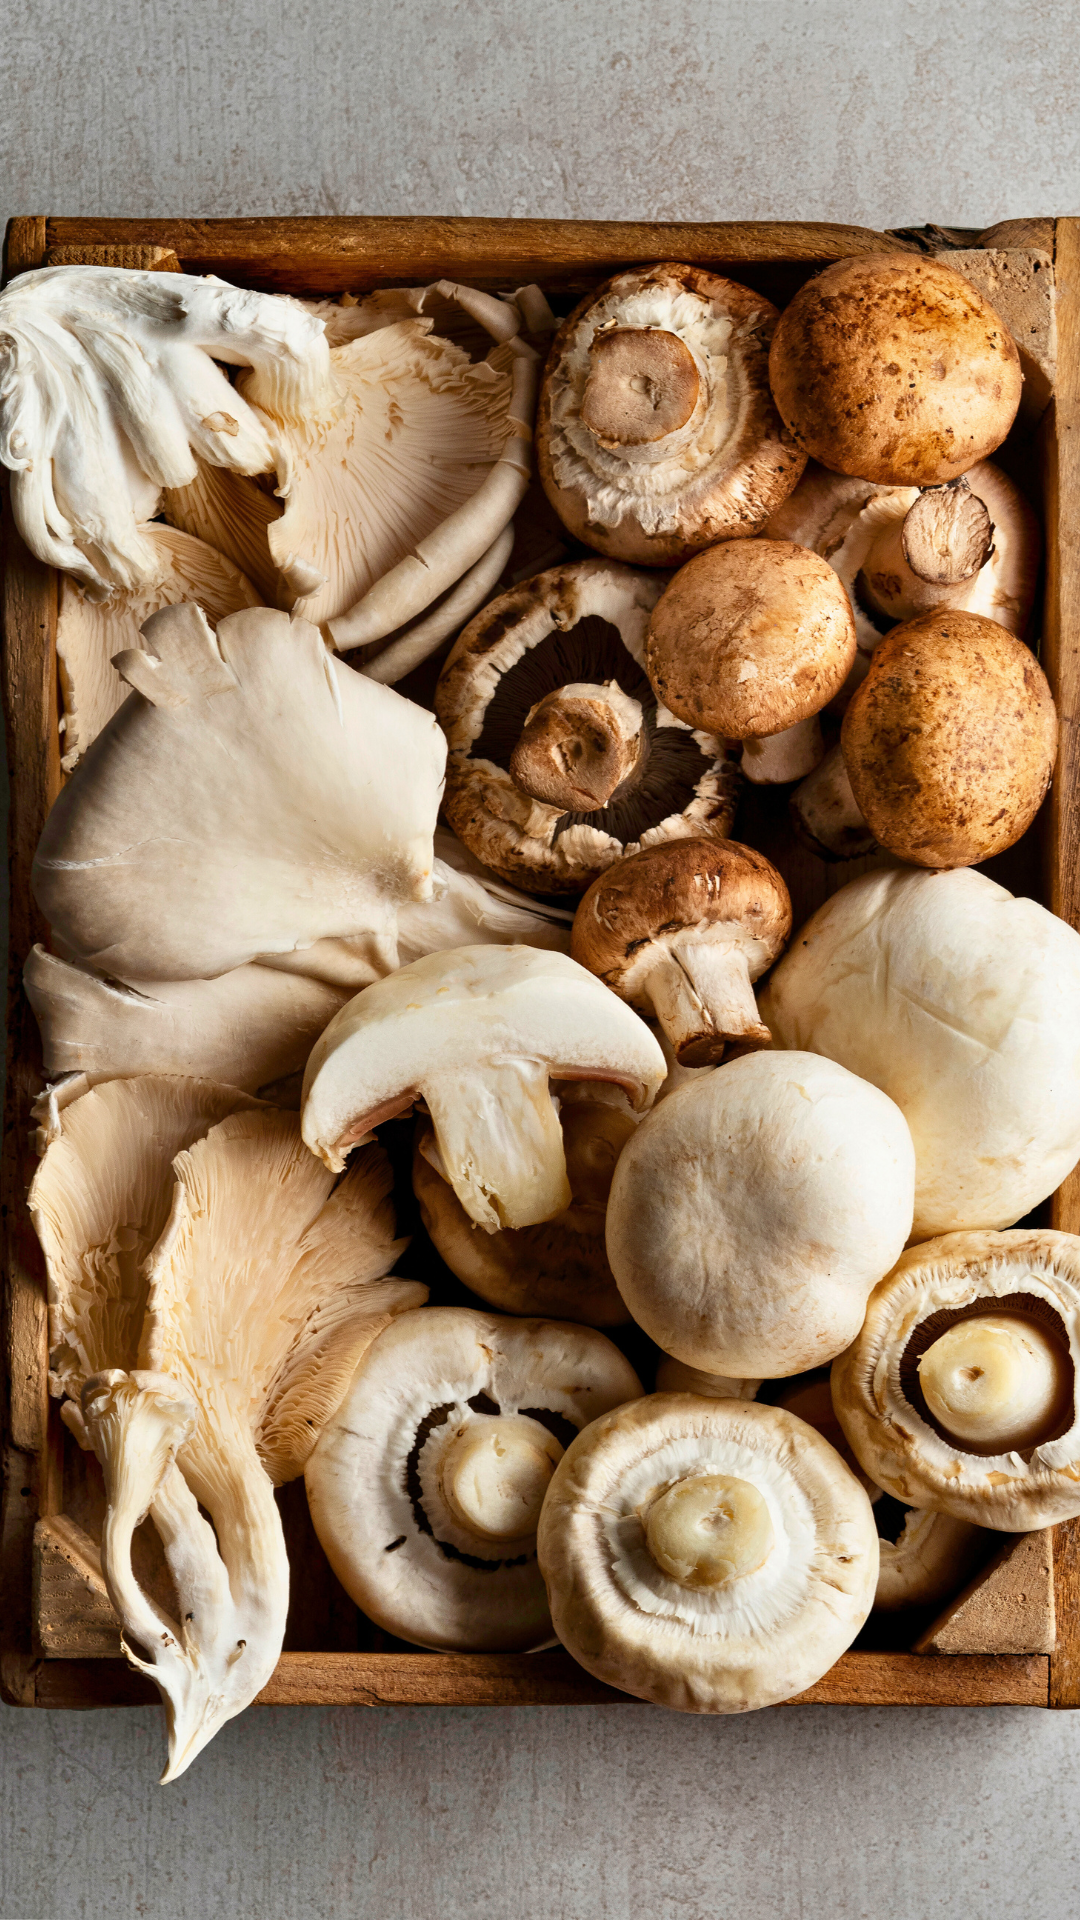 A wooden box filled with different types of mushrooms and how to prepare them.